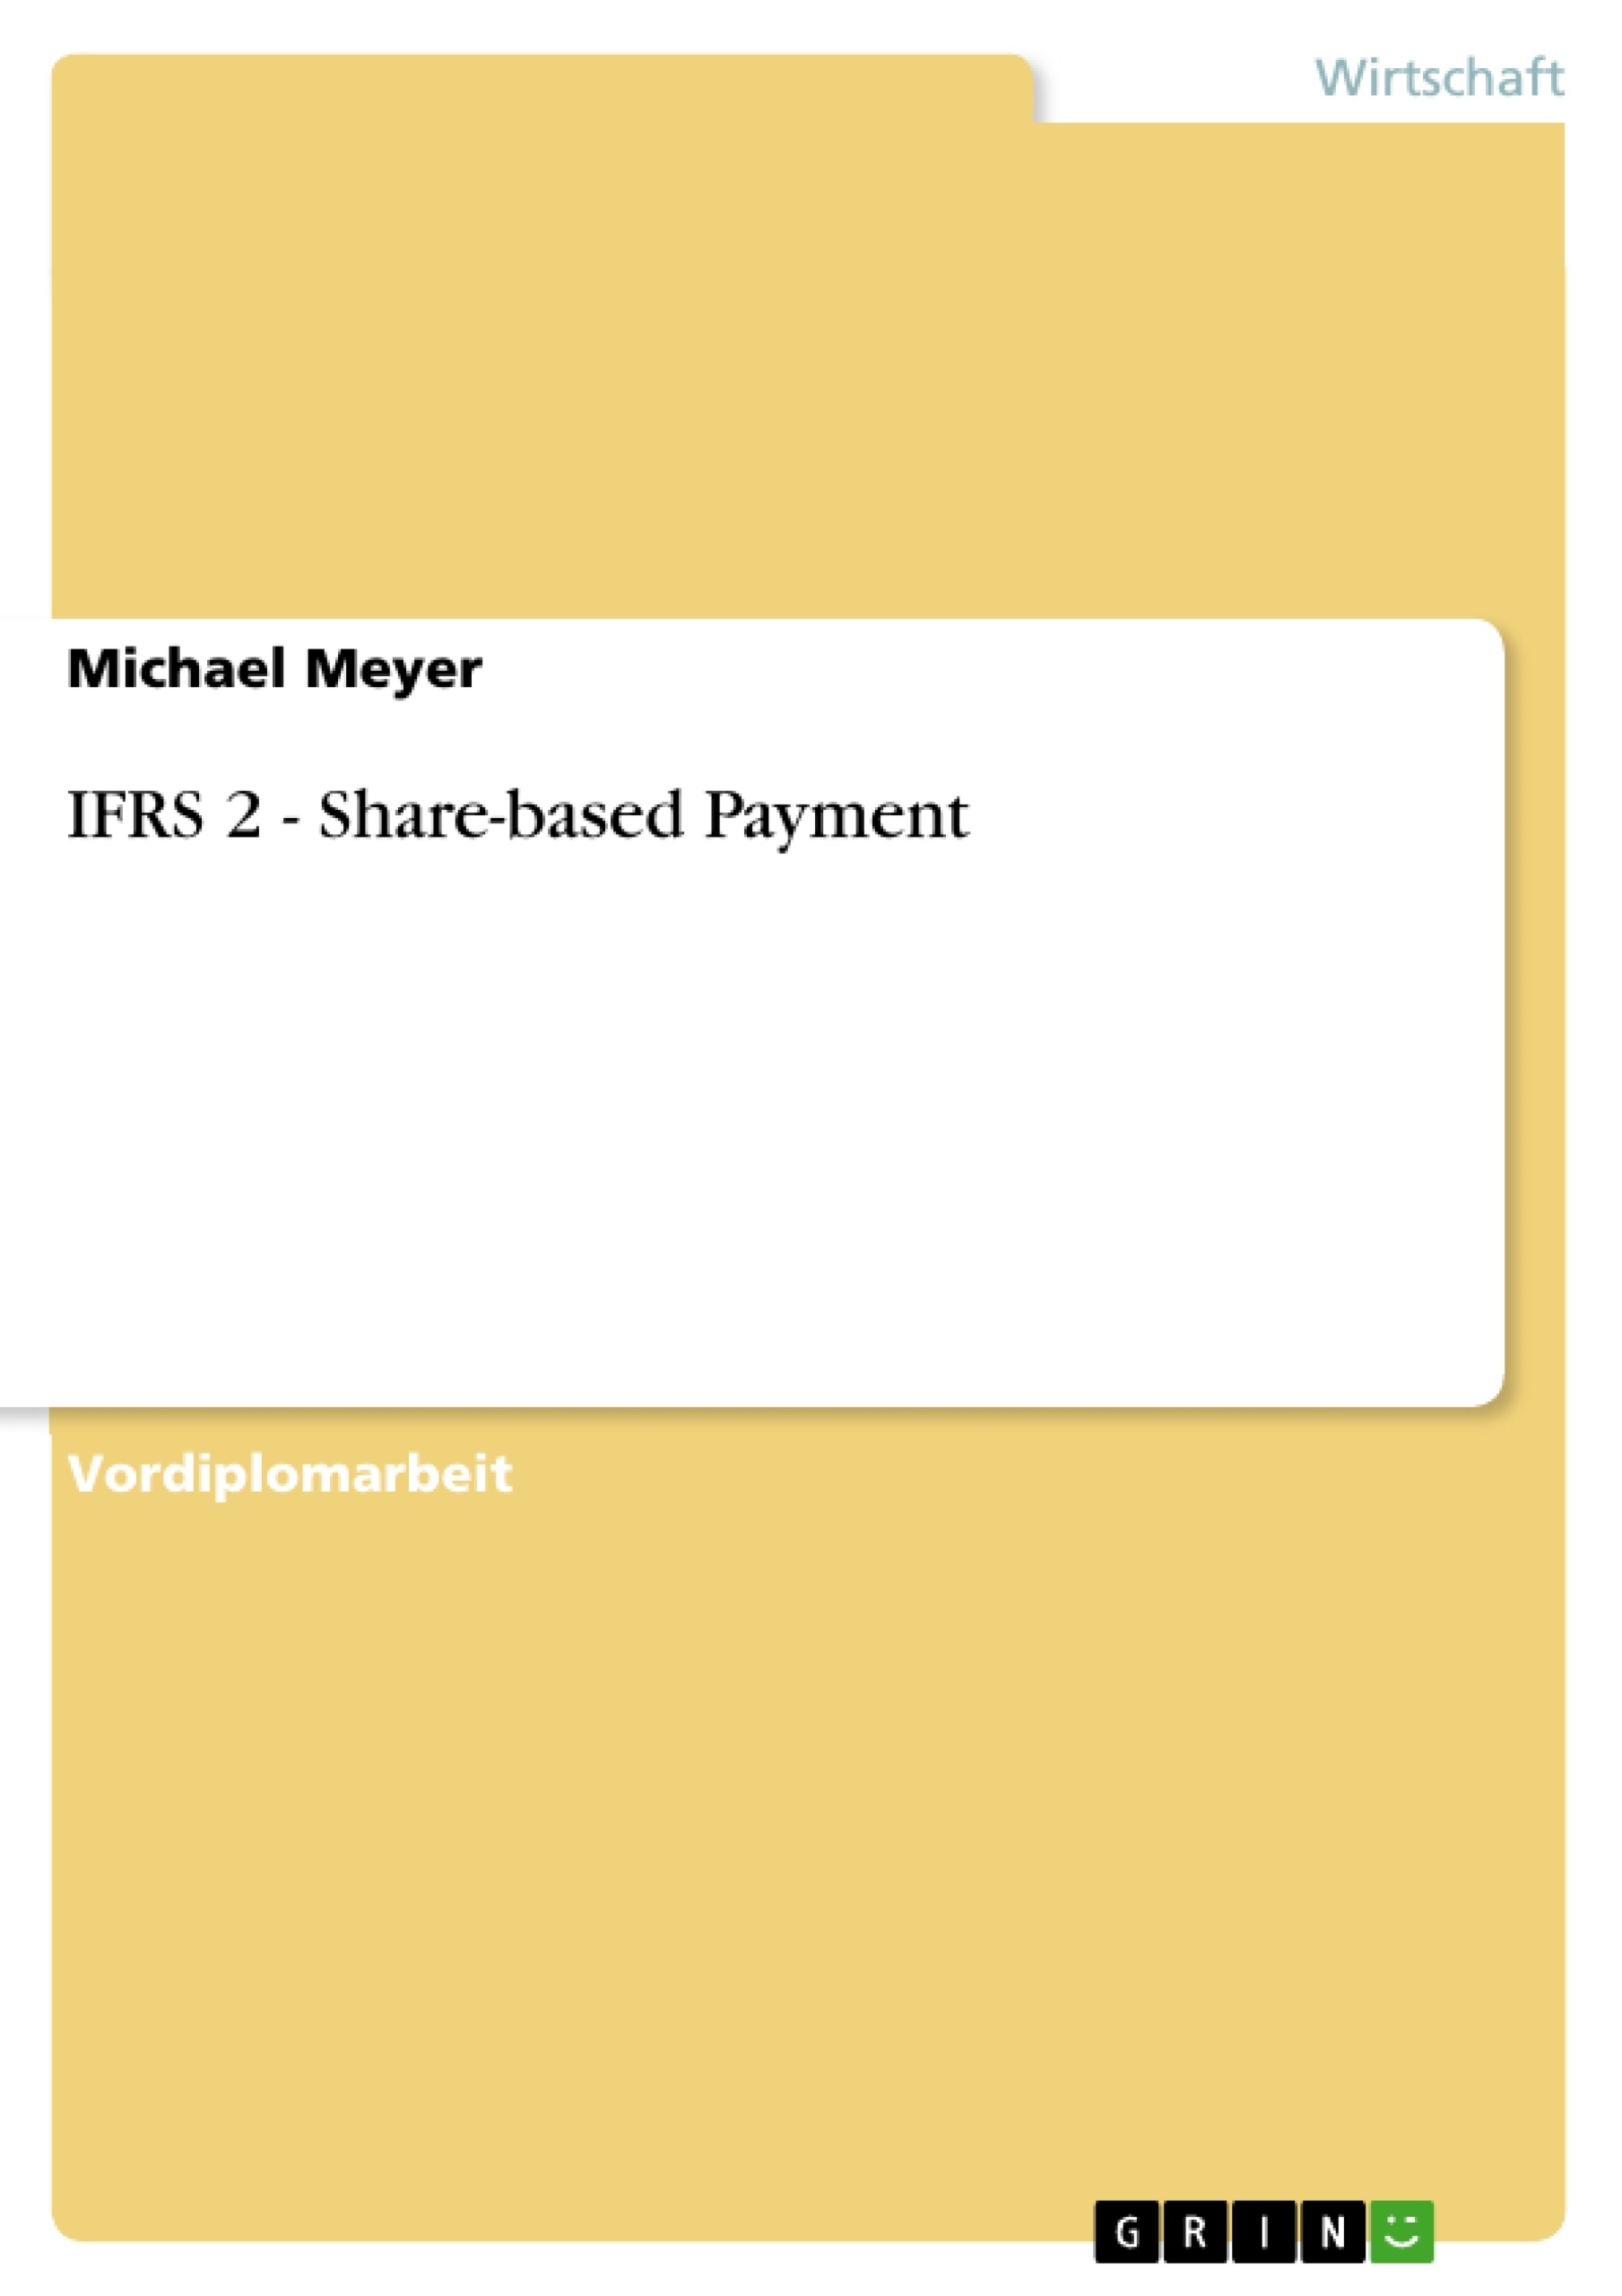 Titre: IFRS 2 - Share-based Payment